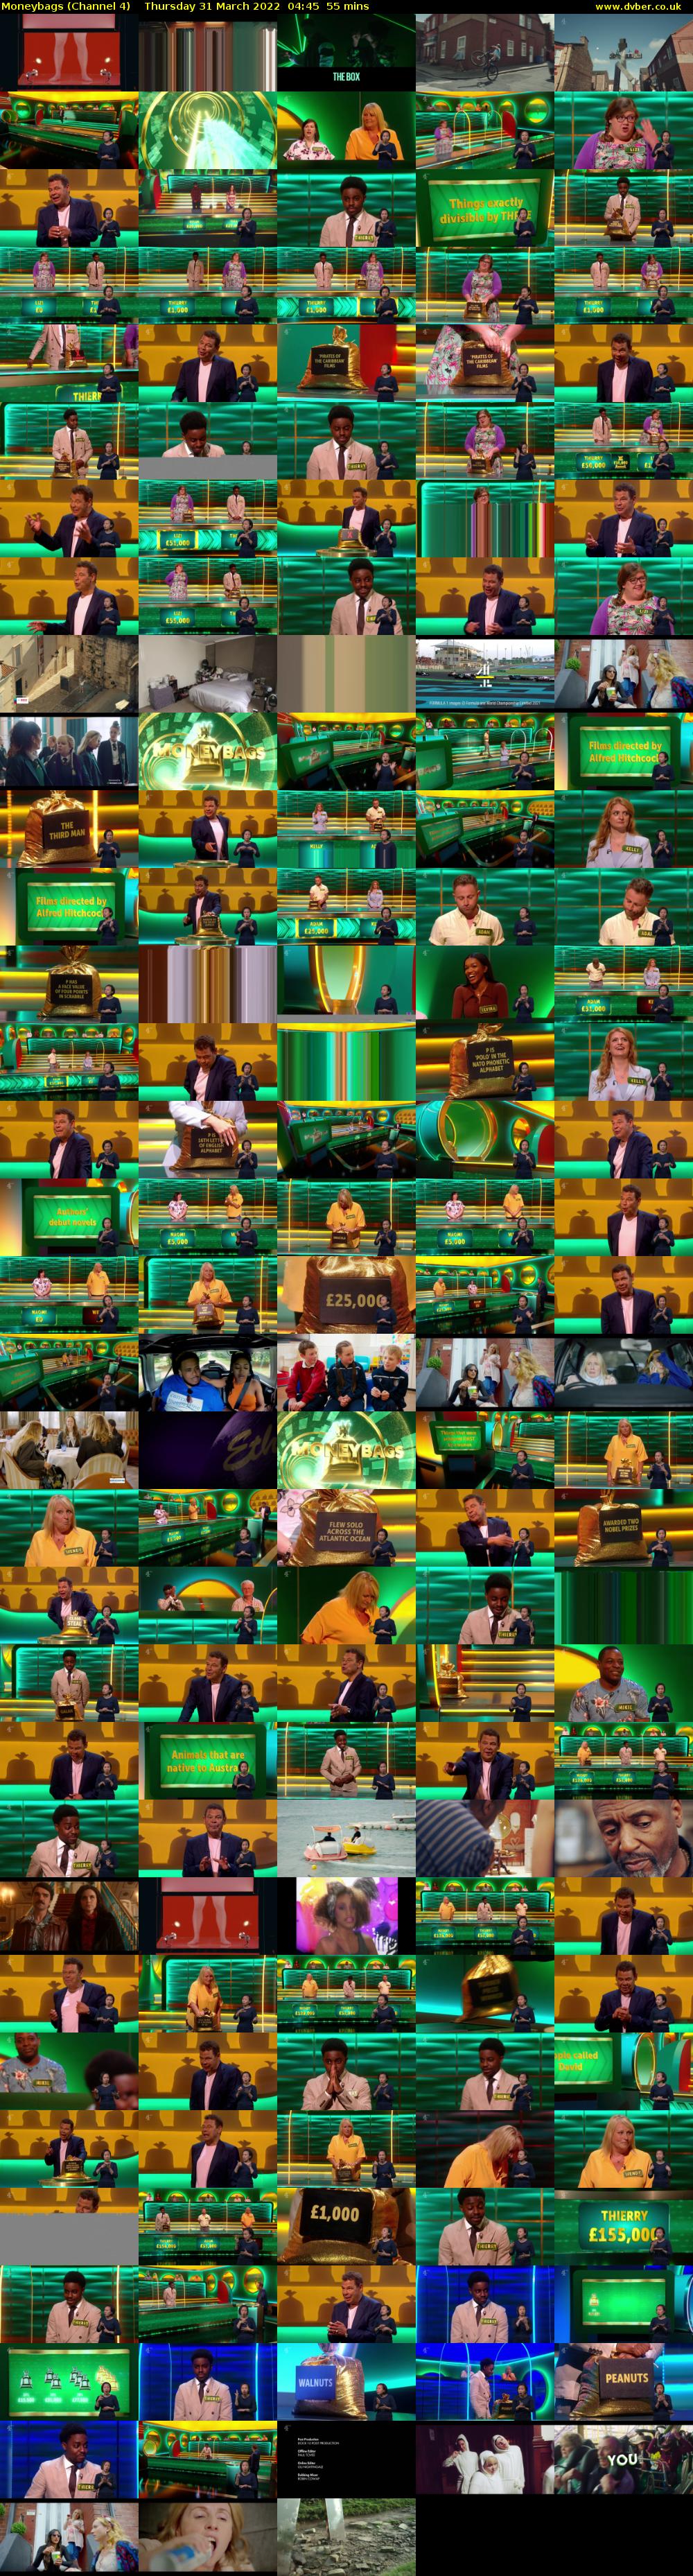 Moneybags (Channel 4) Thursday 31 March 2022 04:45 - 05:40